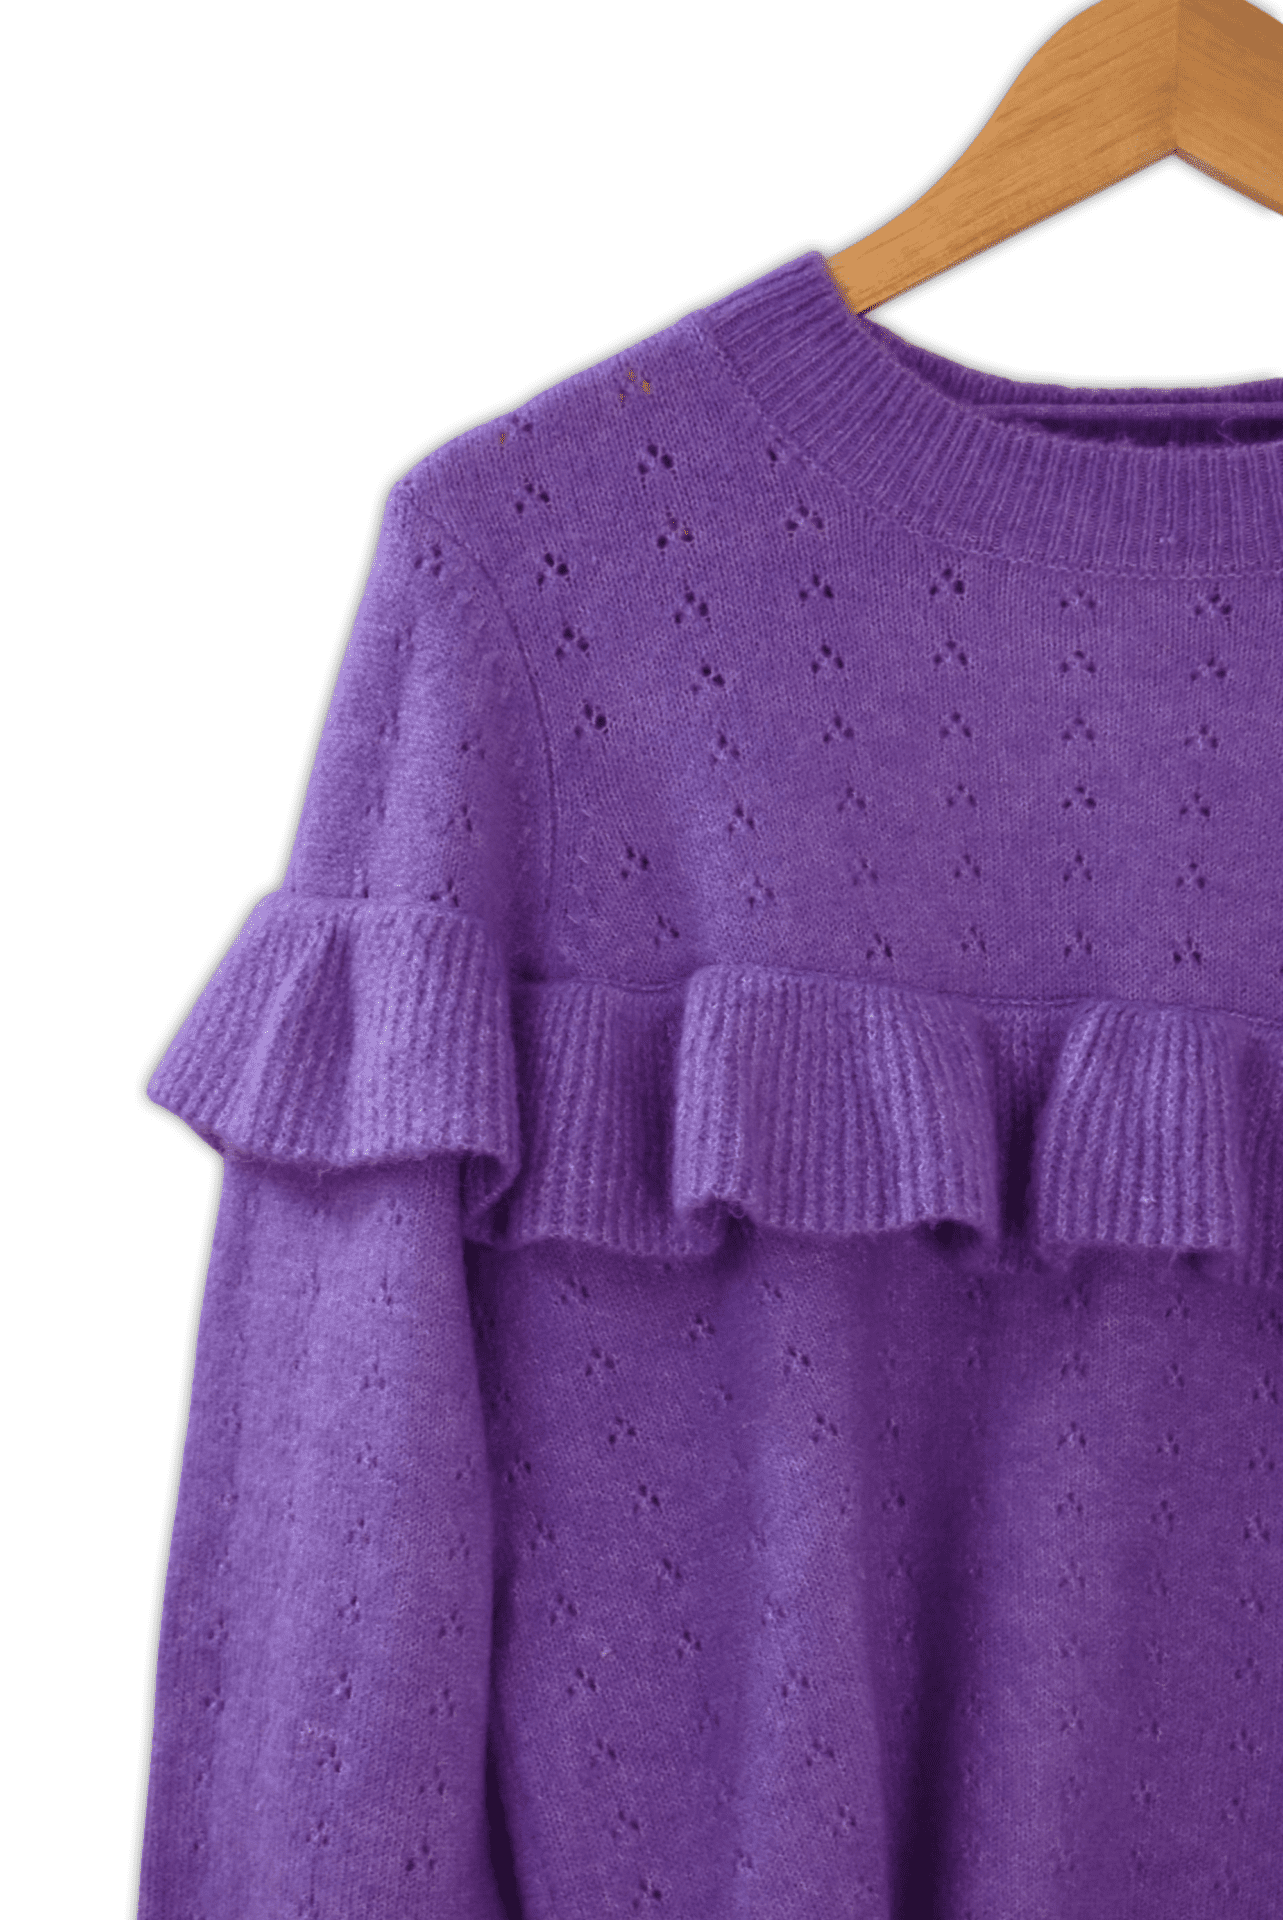 Small Purple knit jumper with frill across chest, high neckline